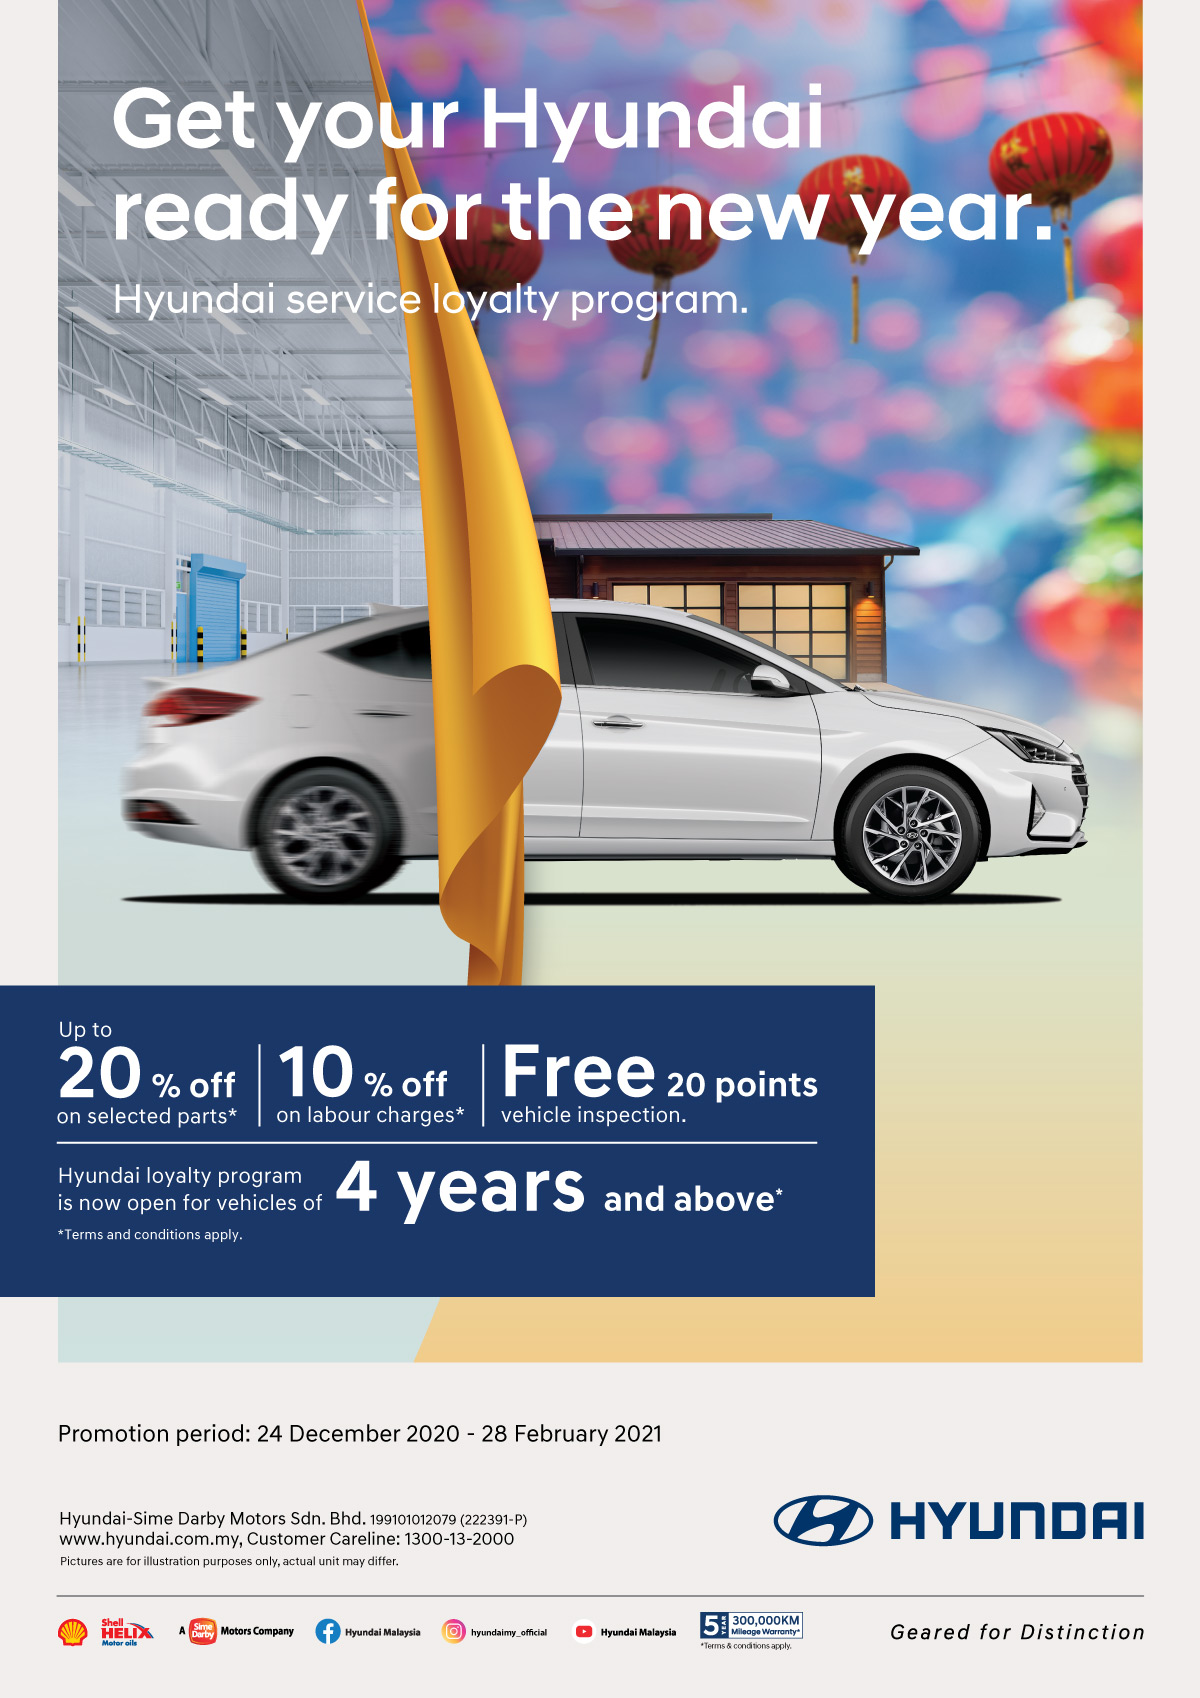 Hyundai service loyalty program | Get your Hyundai ready for the new year. Up to 20% off on selected parts* | 10% off on labour charges* | Free 20 points vehicle inspection. | Hyundai loyalty program is now open for vehicles of 4 years and above* Terms and conditions apply. Promotion period : 24 December 2020 - 28 February 2021.